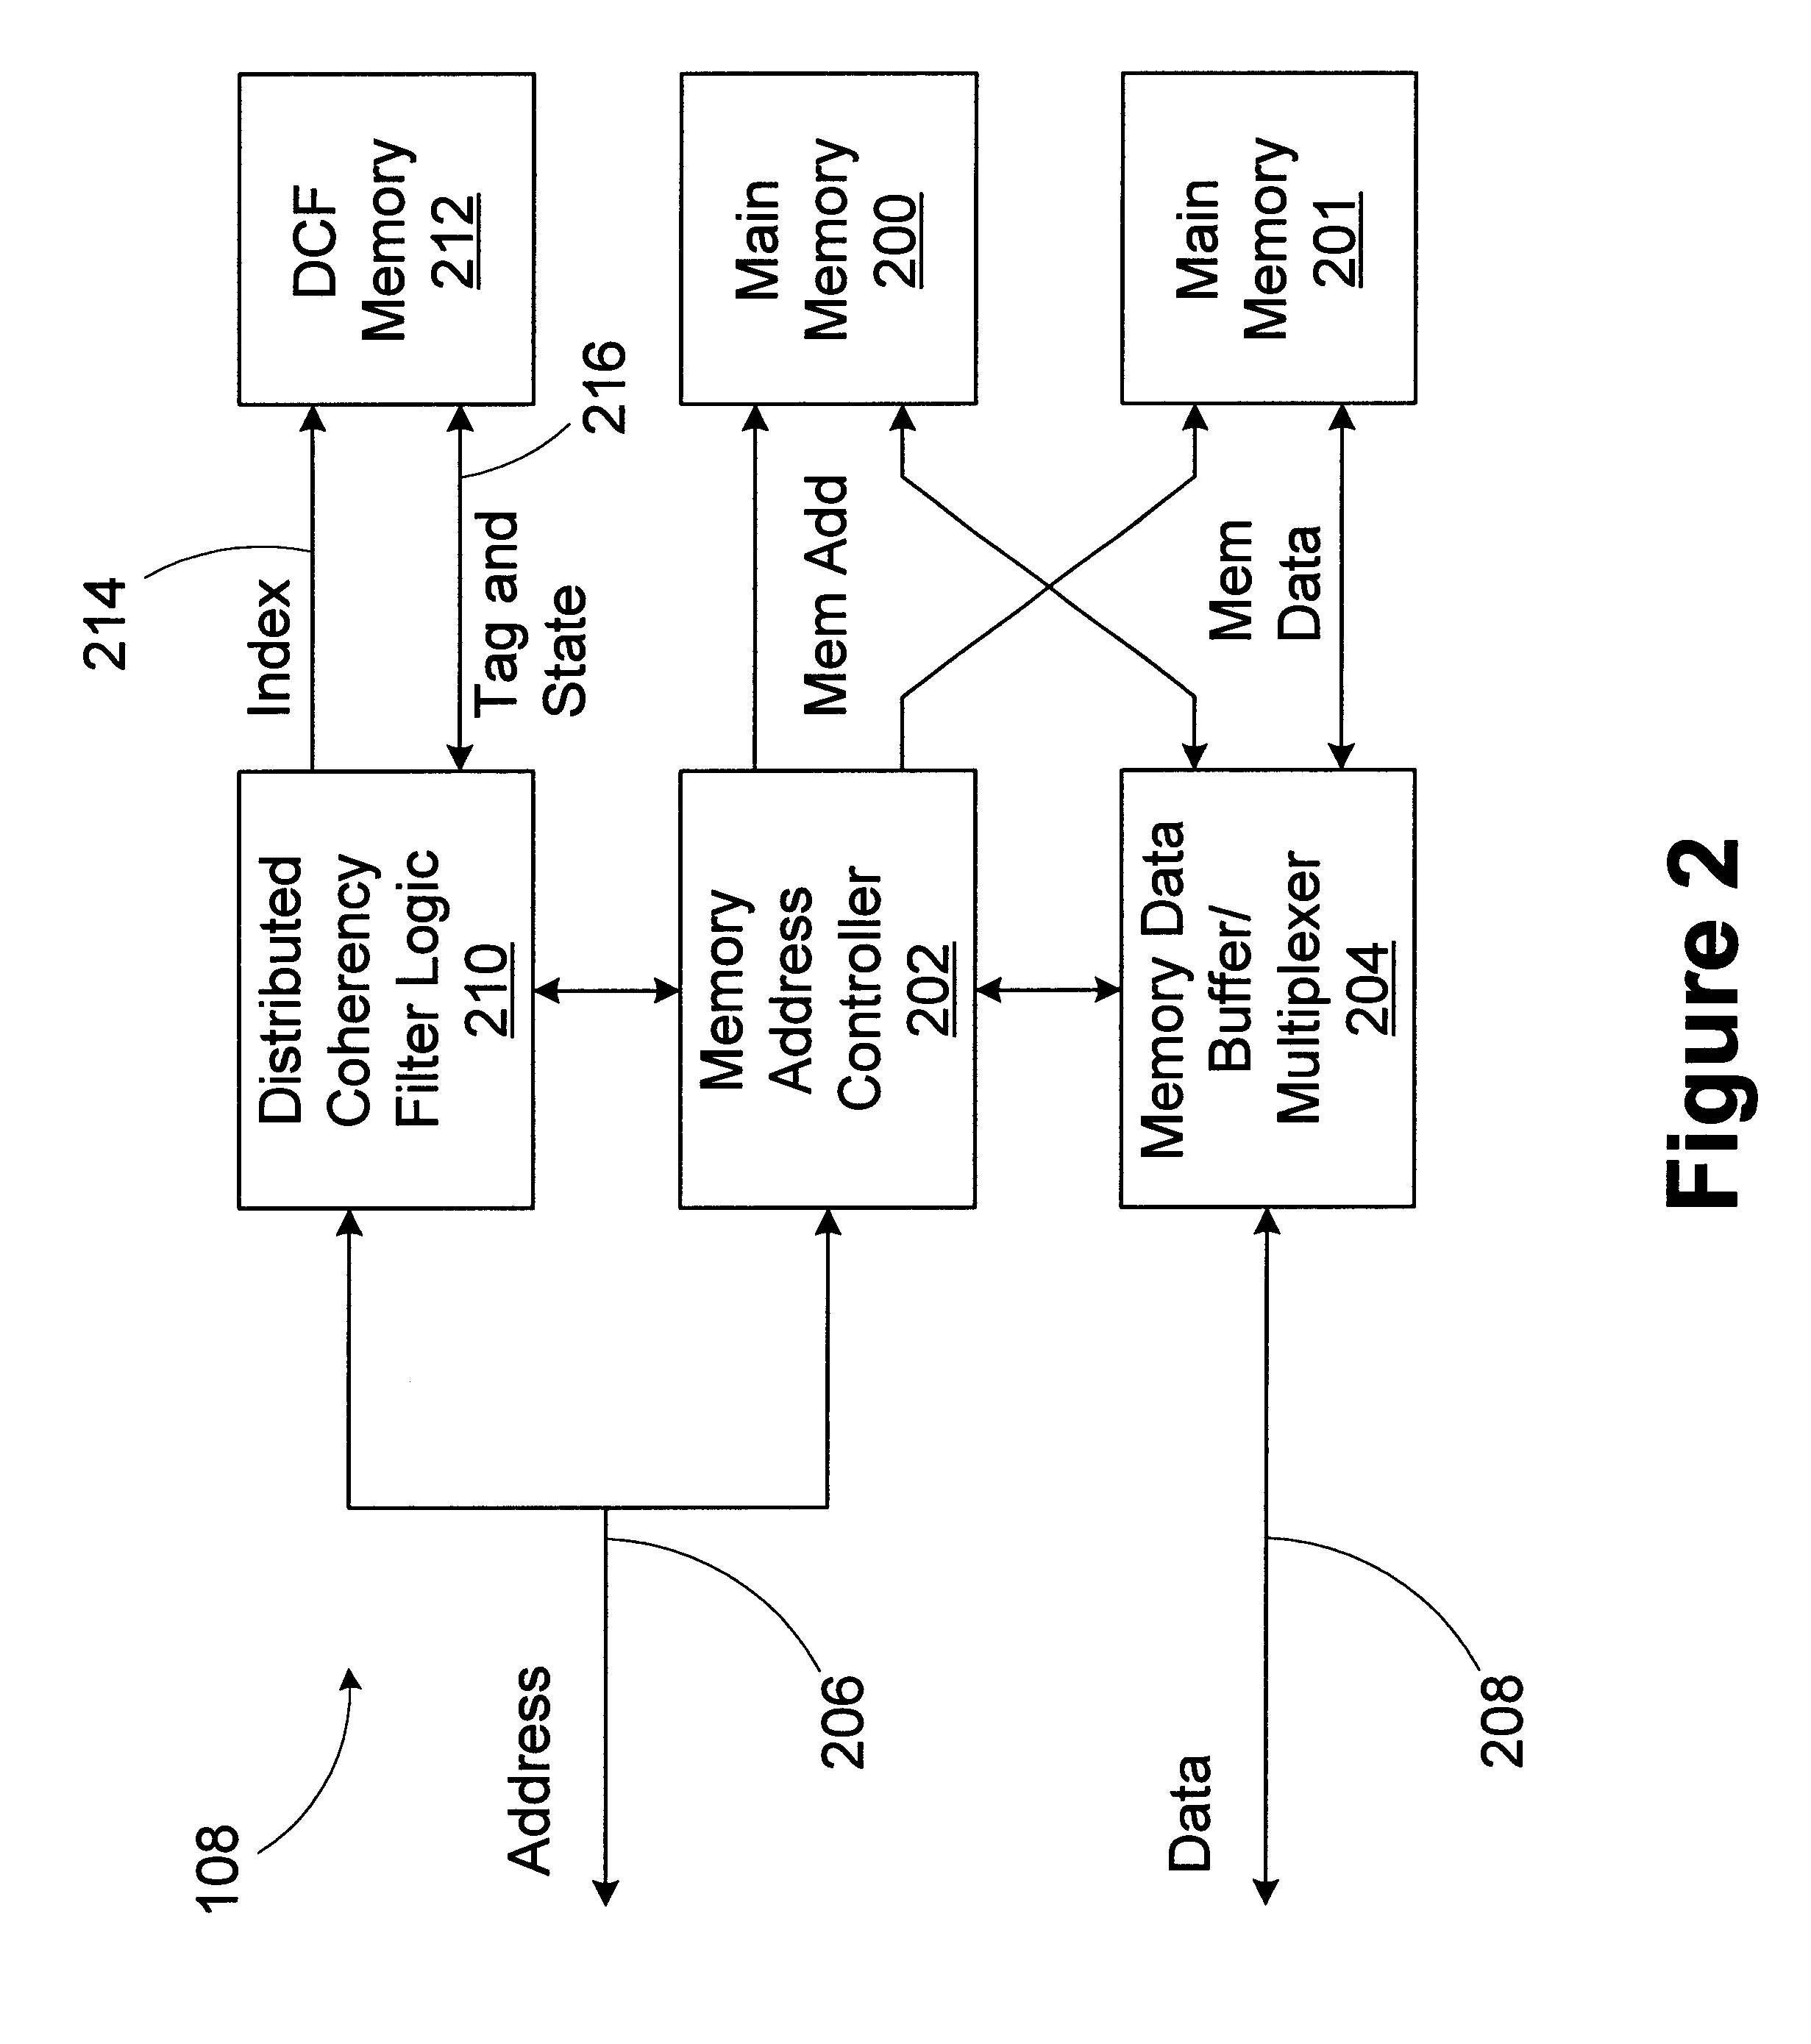 Method and apparatus for maintaining cache coherency in a computer system having multiple processor buses